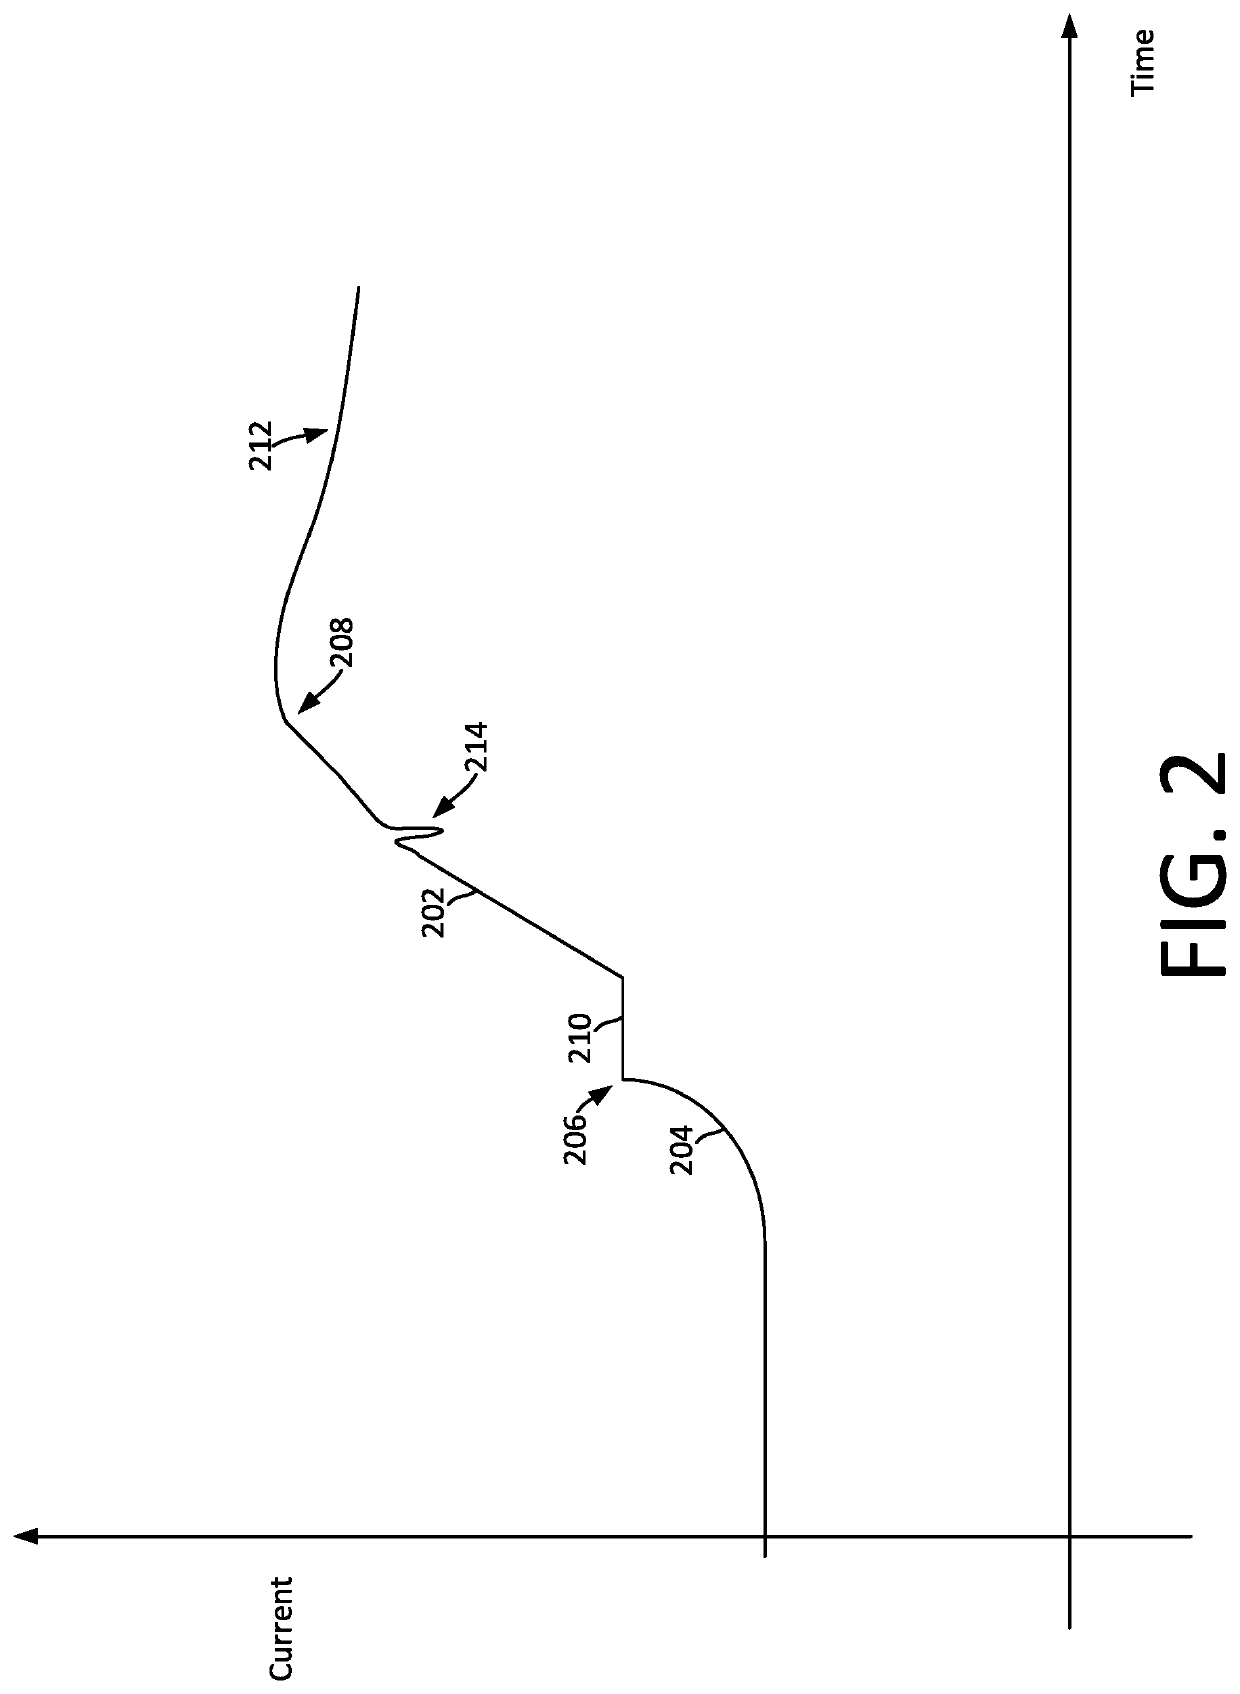 Adaptive single event latchup (SEL) current surge mitigation